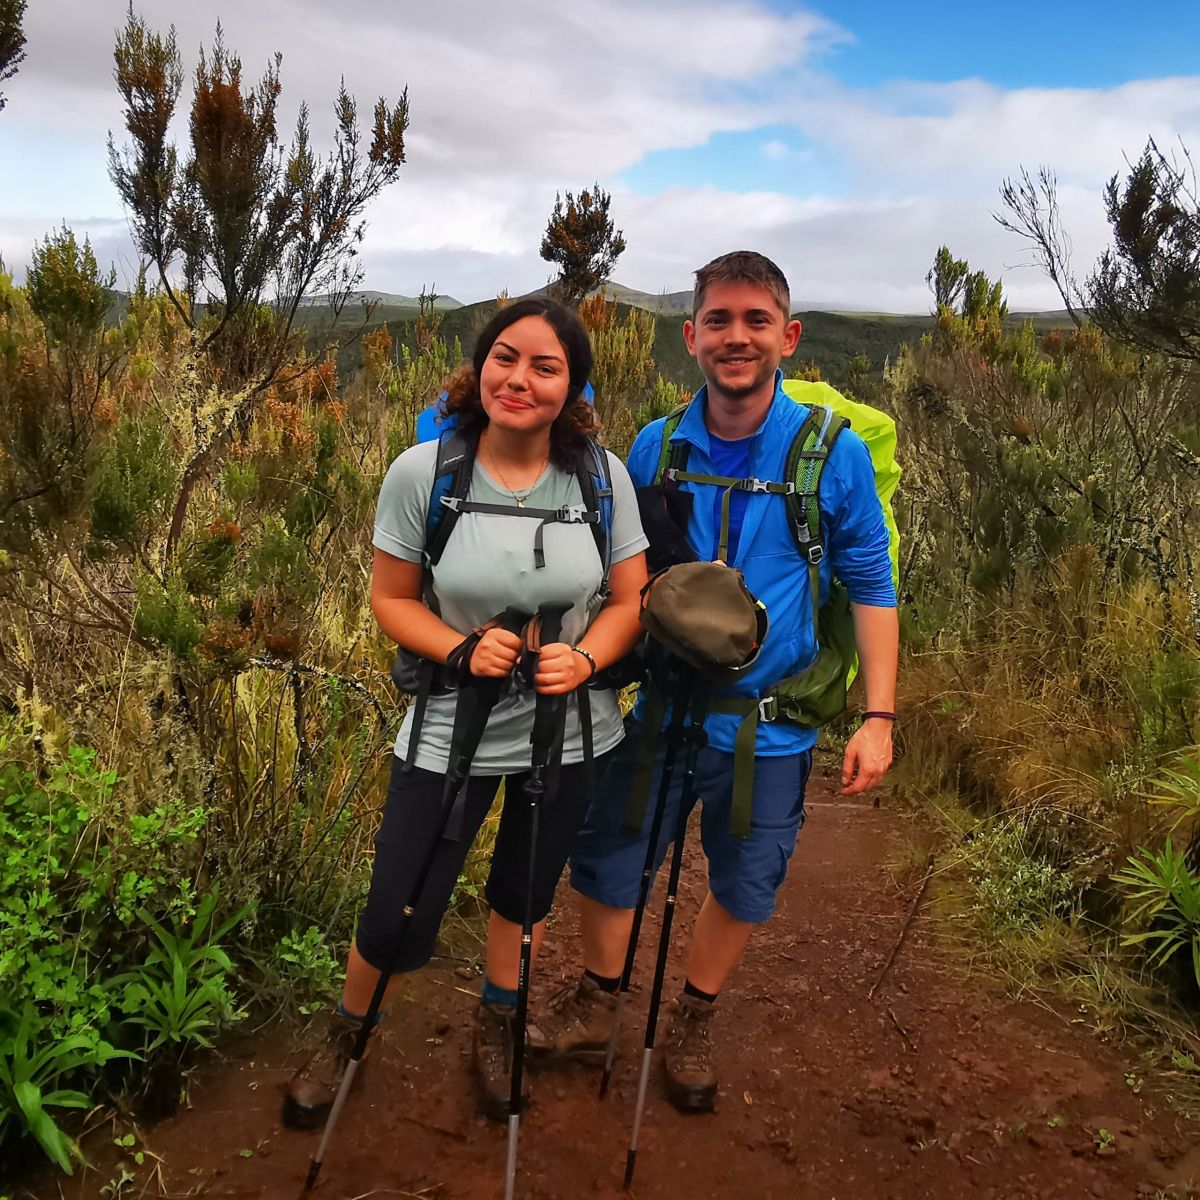 Arwa and Matias in hiking gear and smiling at the camera in the moorland section of Kilimanjaro